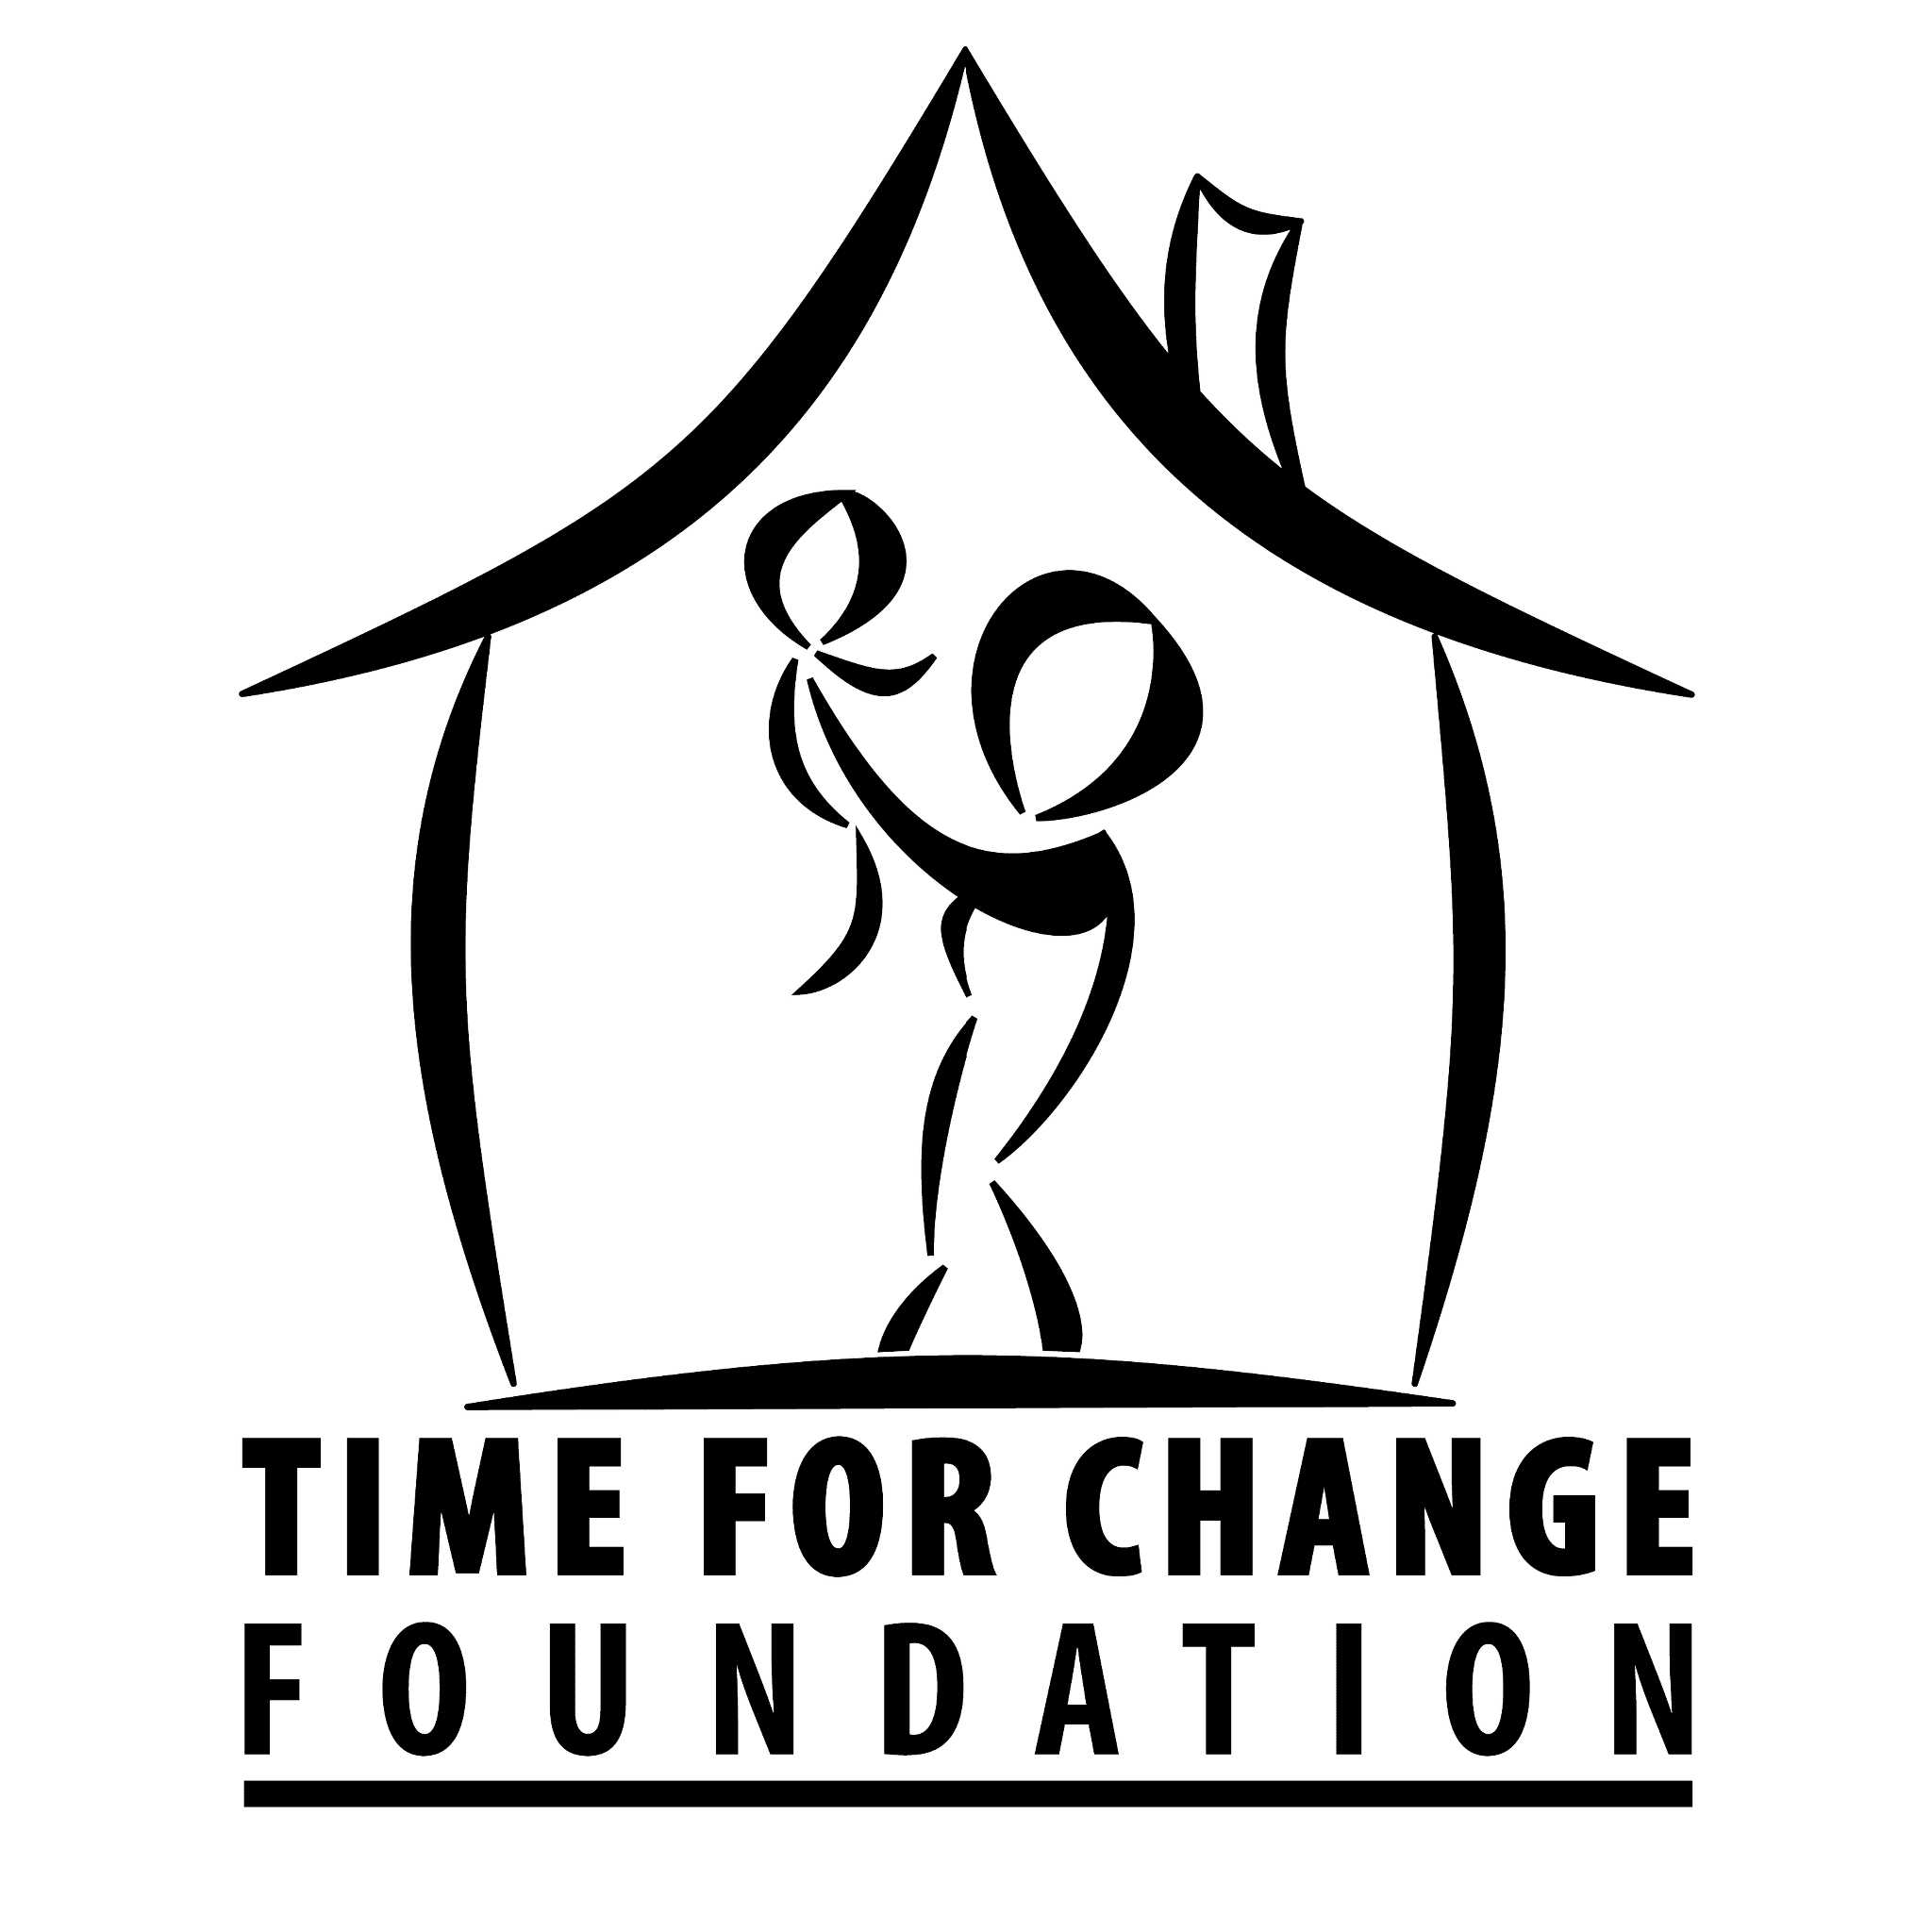 Emergency, Permanent Supportive And Affordable Housing at TFCF Foundation